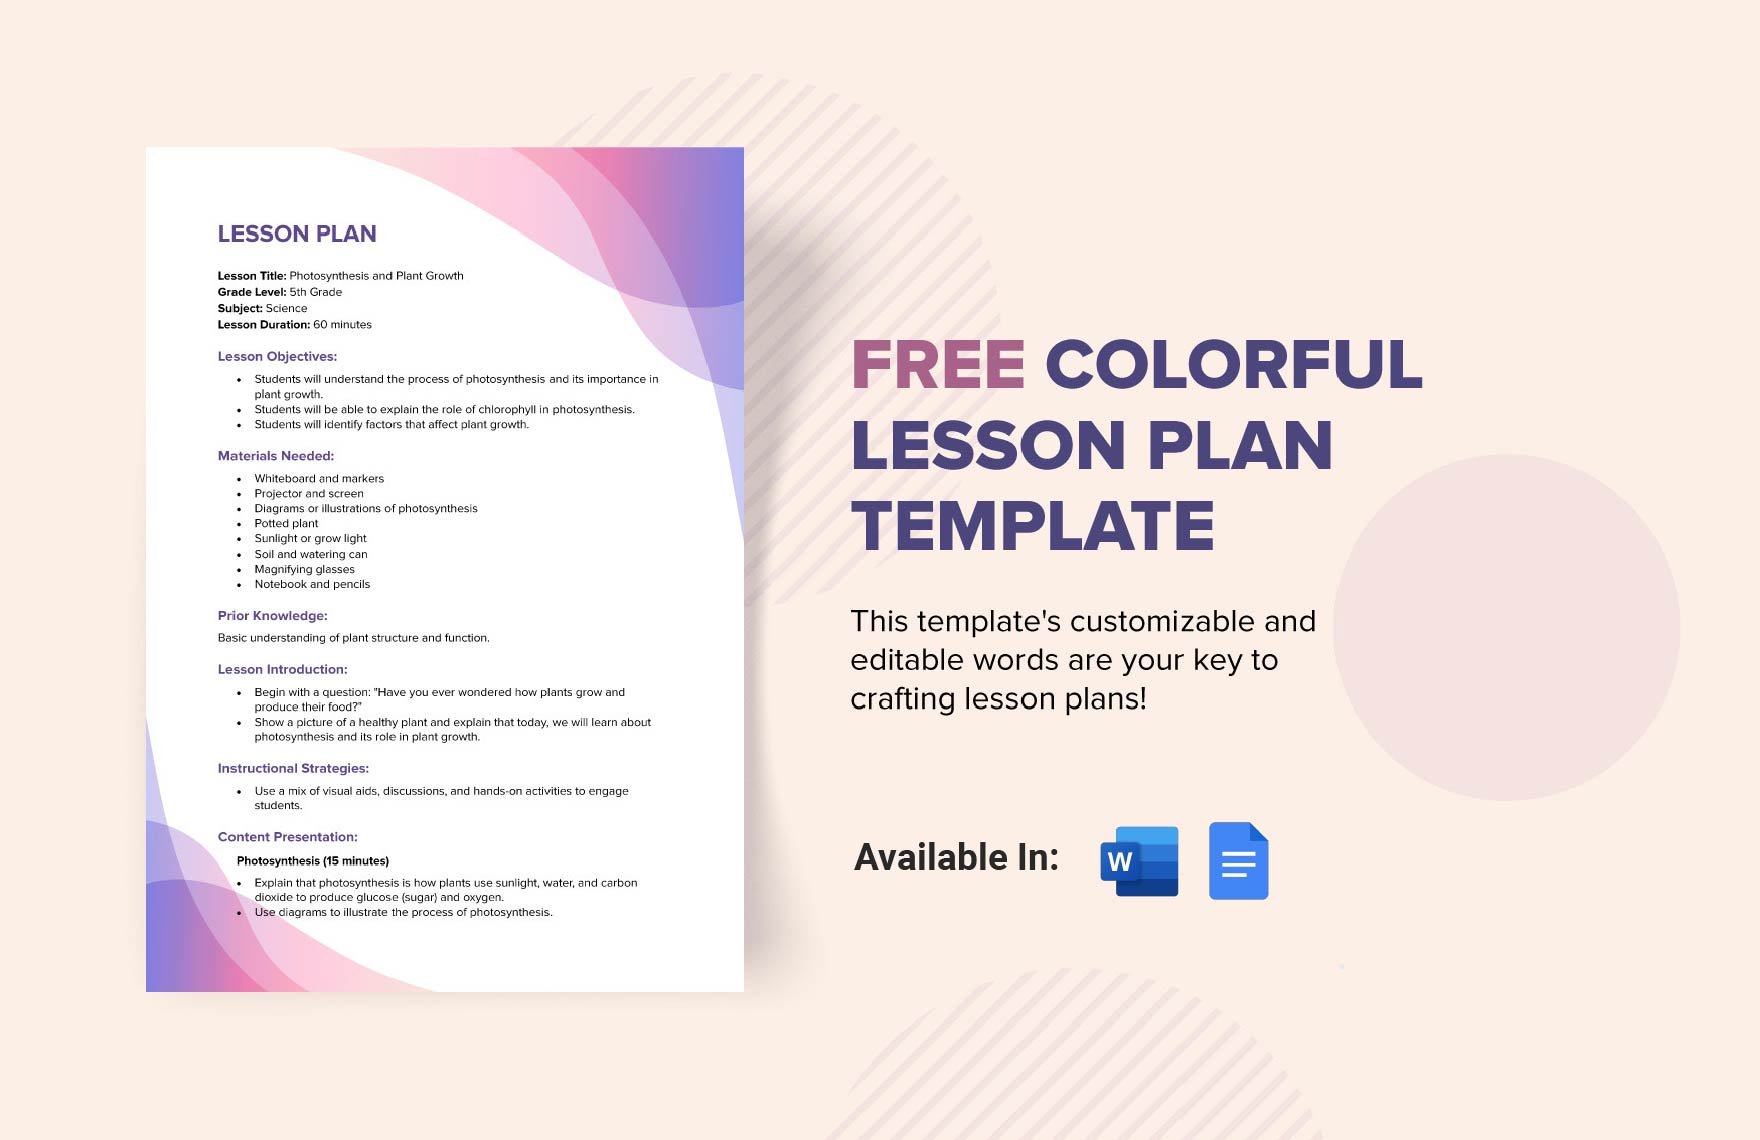 Colorful Lesson Plan Template